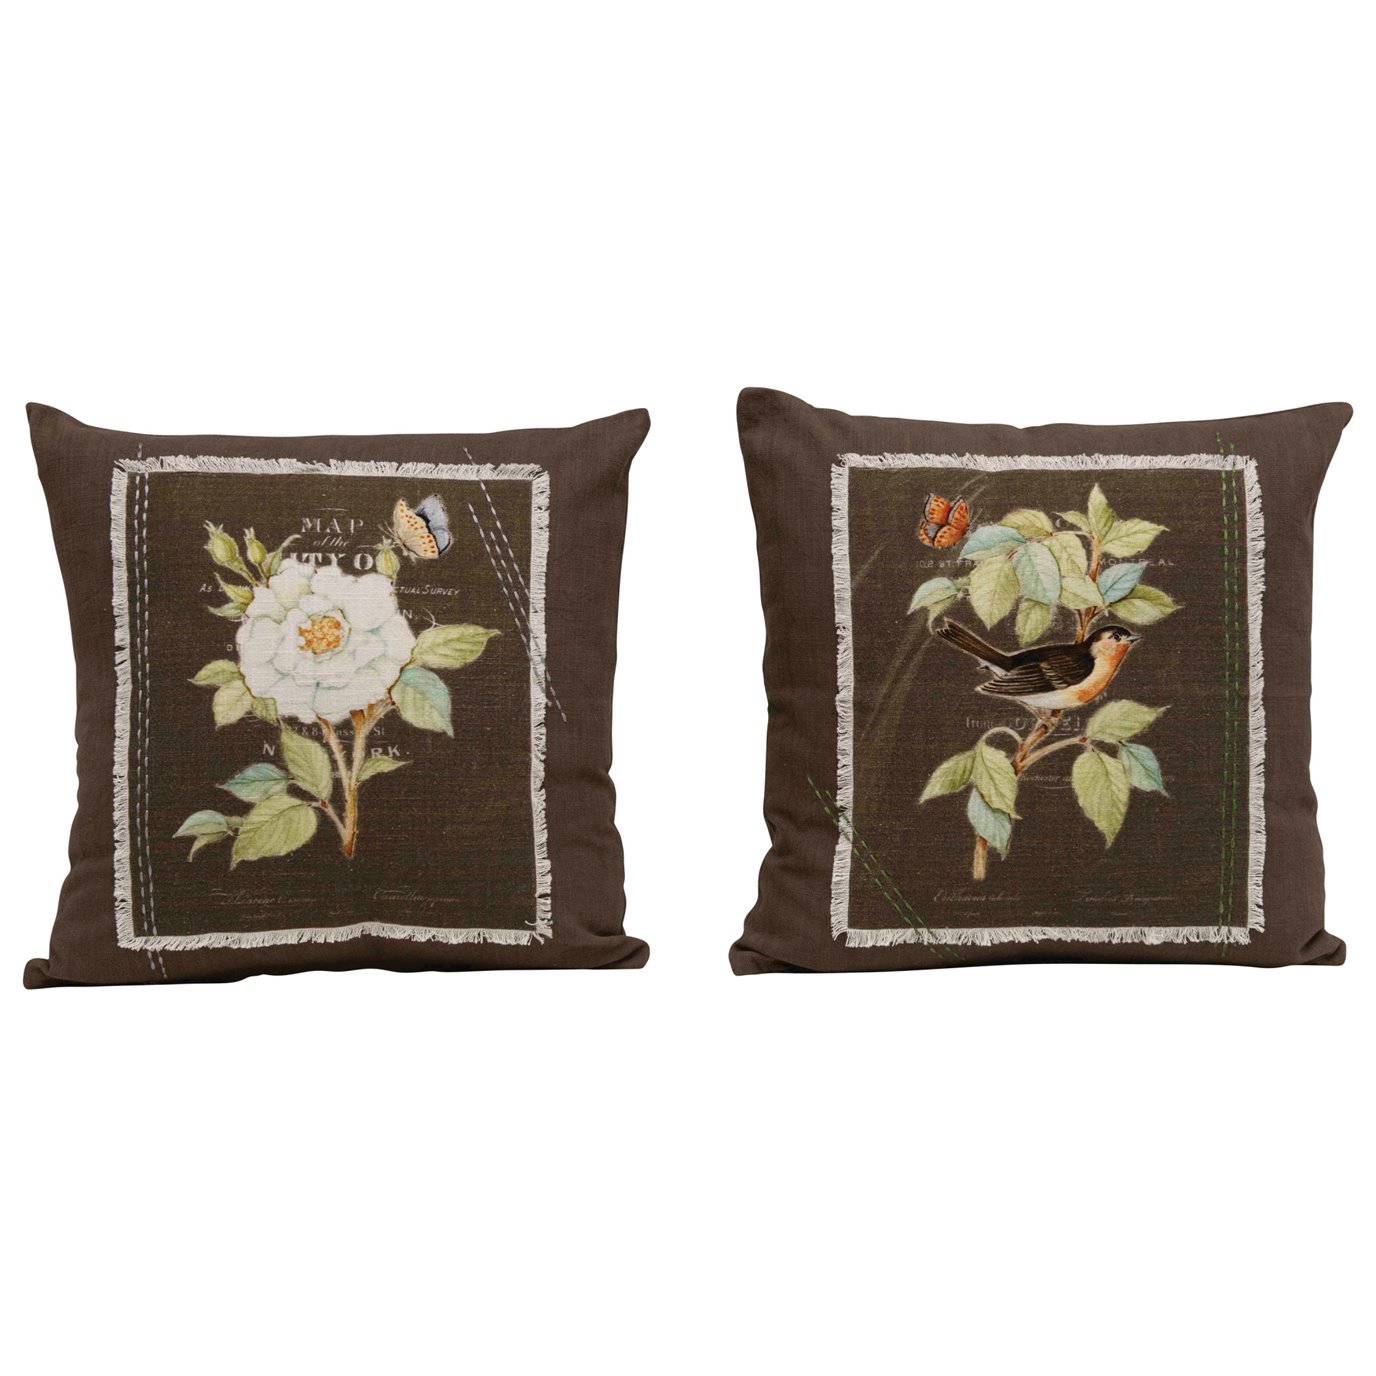 Square Floral Embroidered Cotton Pillow with Fringe Accent (Set of 2 Patterns)